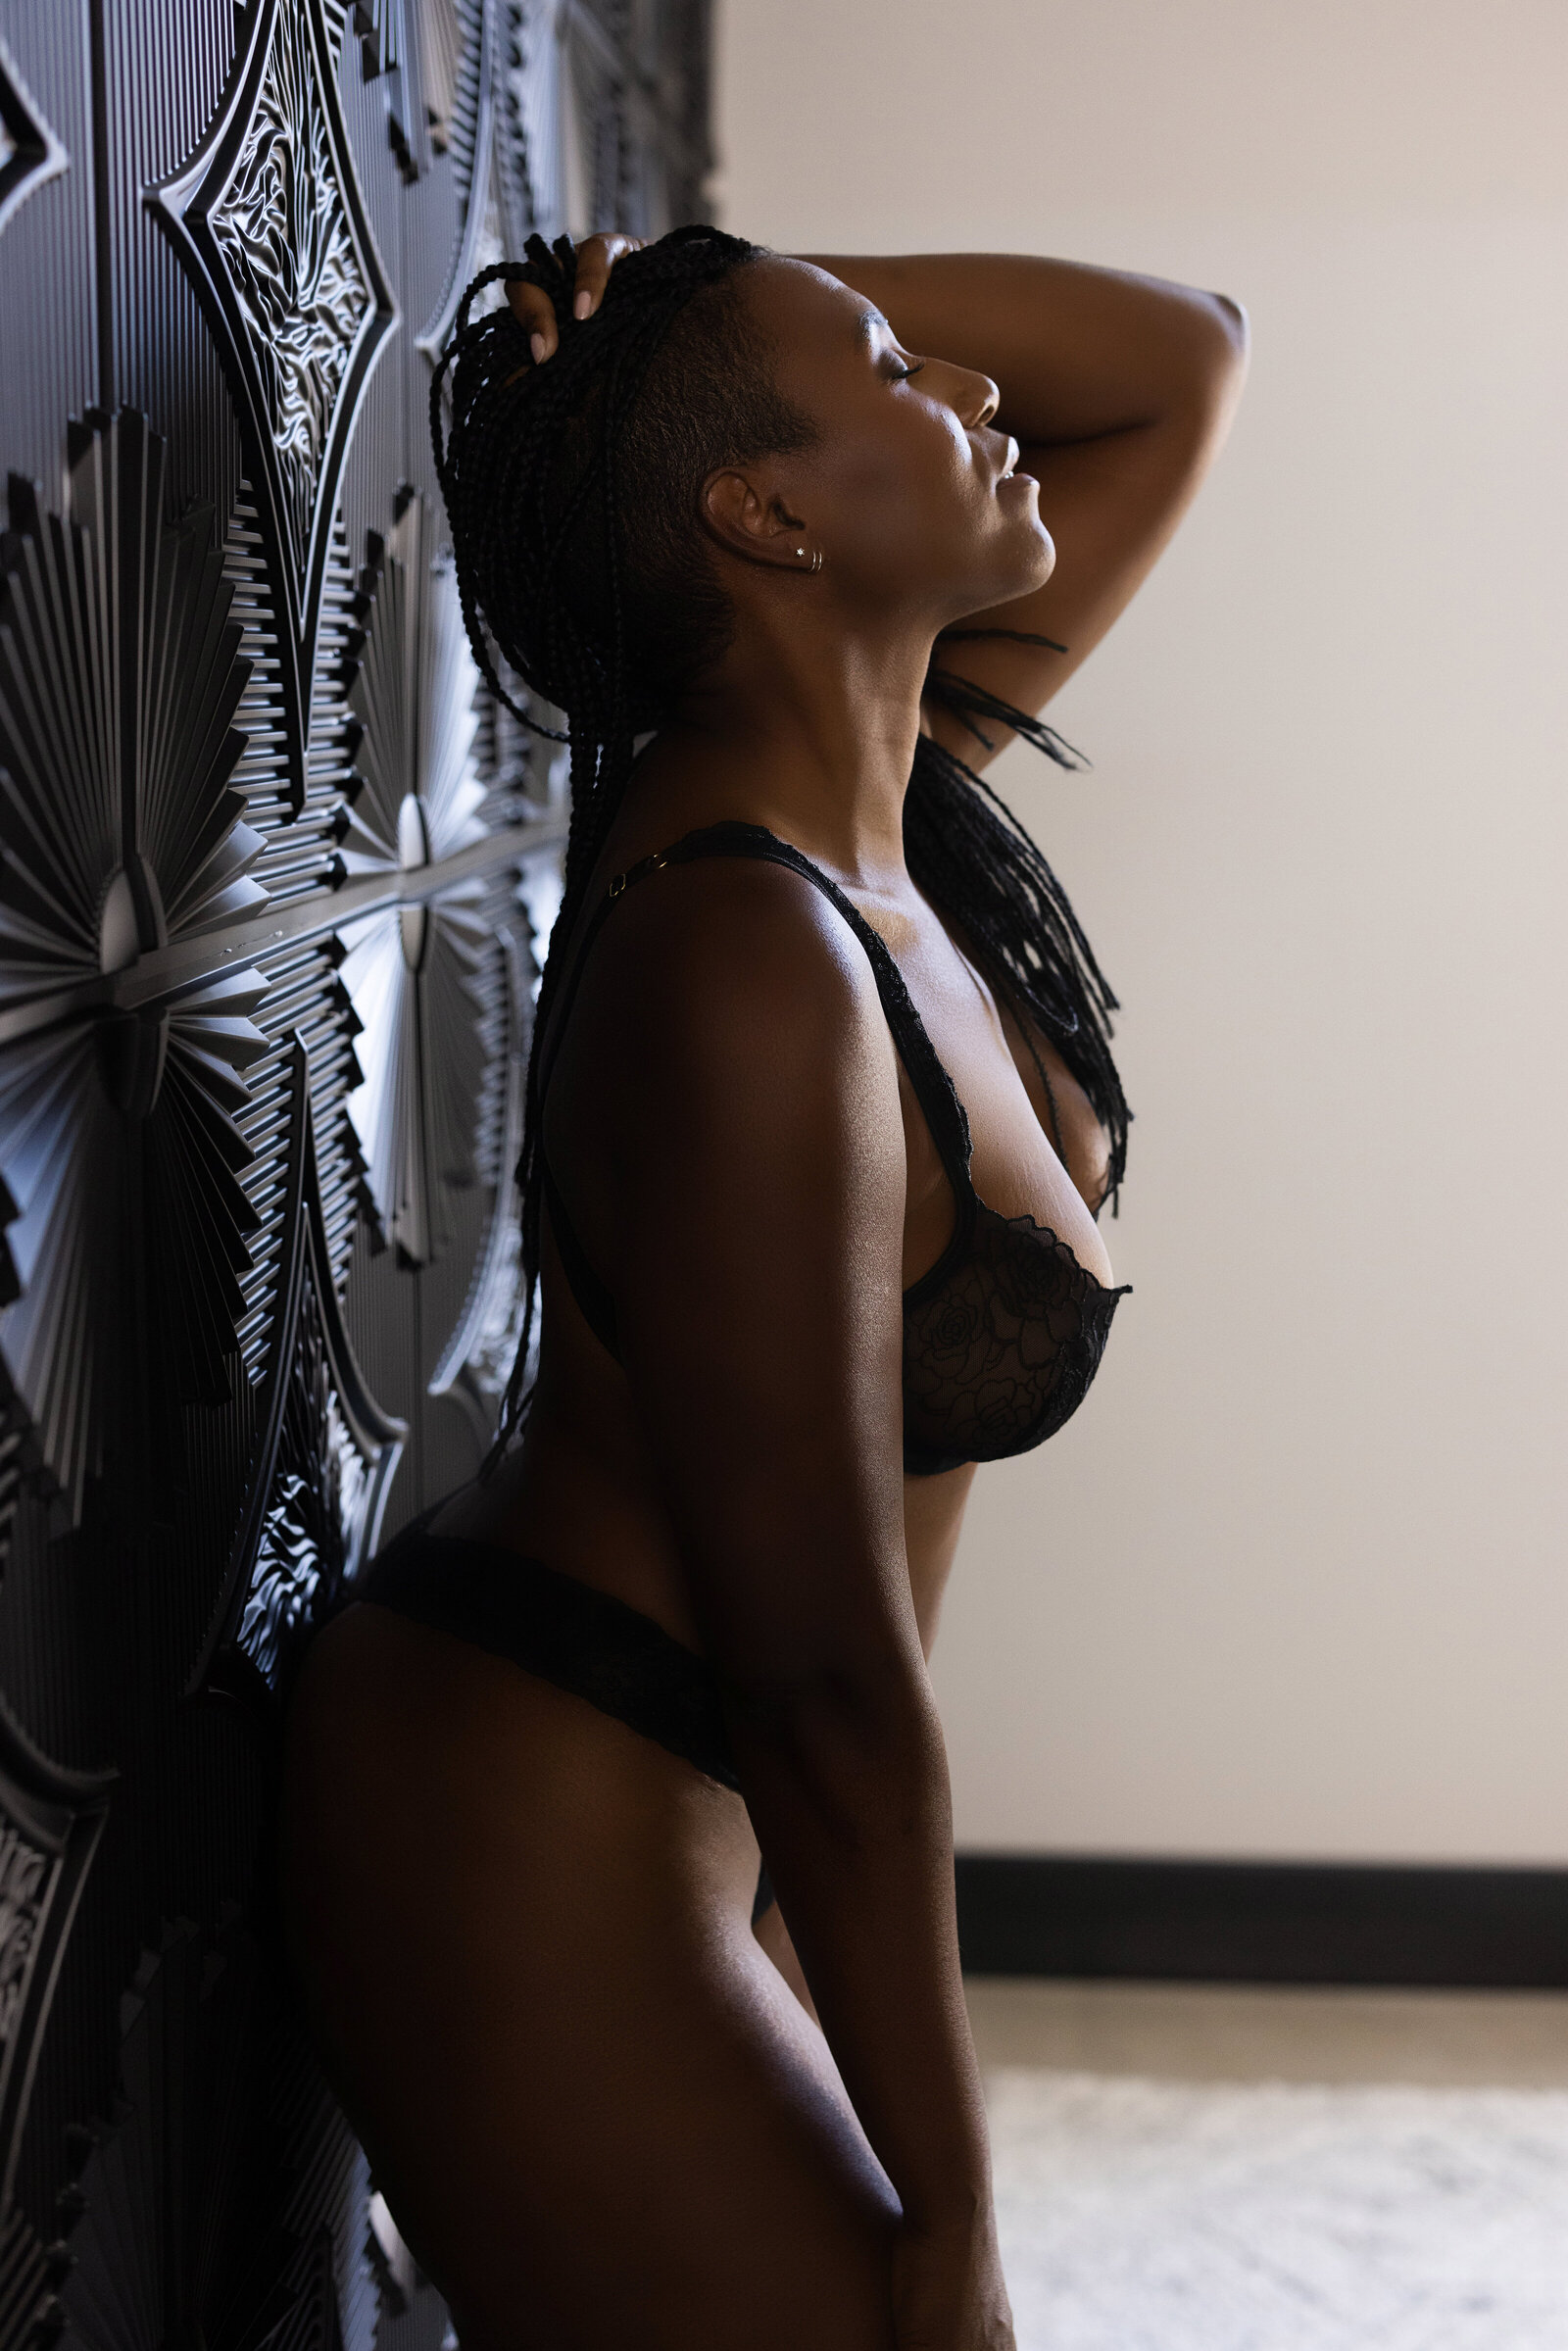 black woman leaning against a wall in a black bra lingerie set posing for a boudoir image